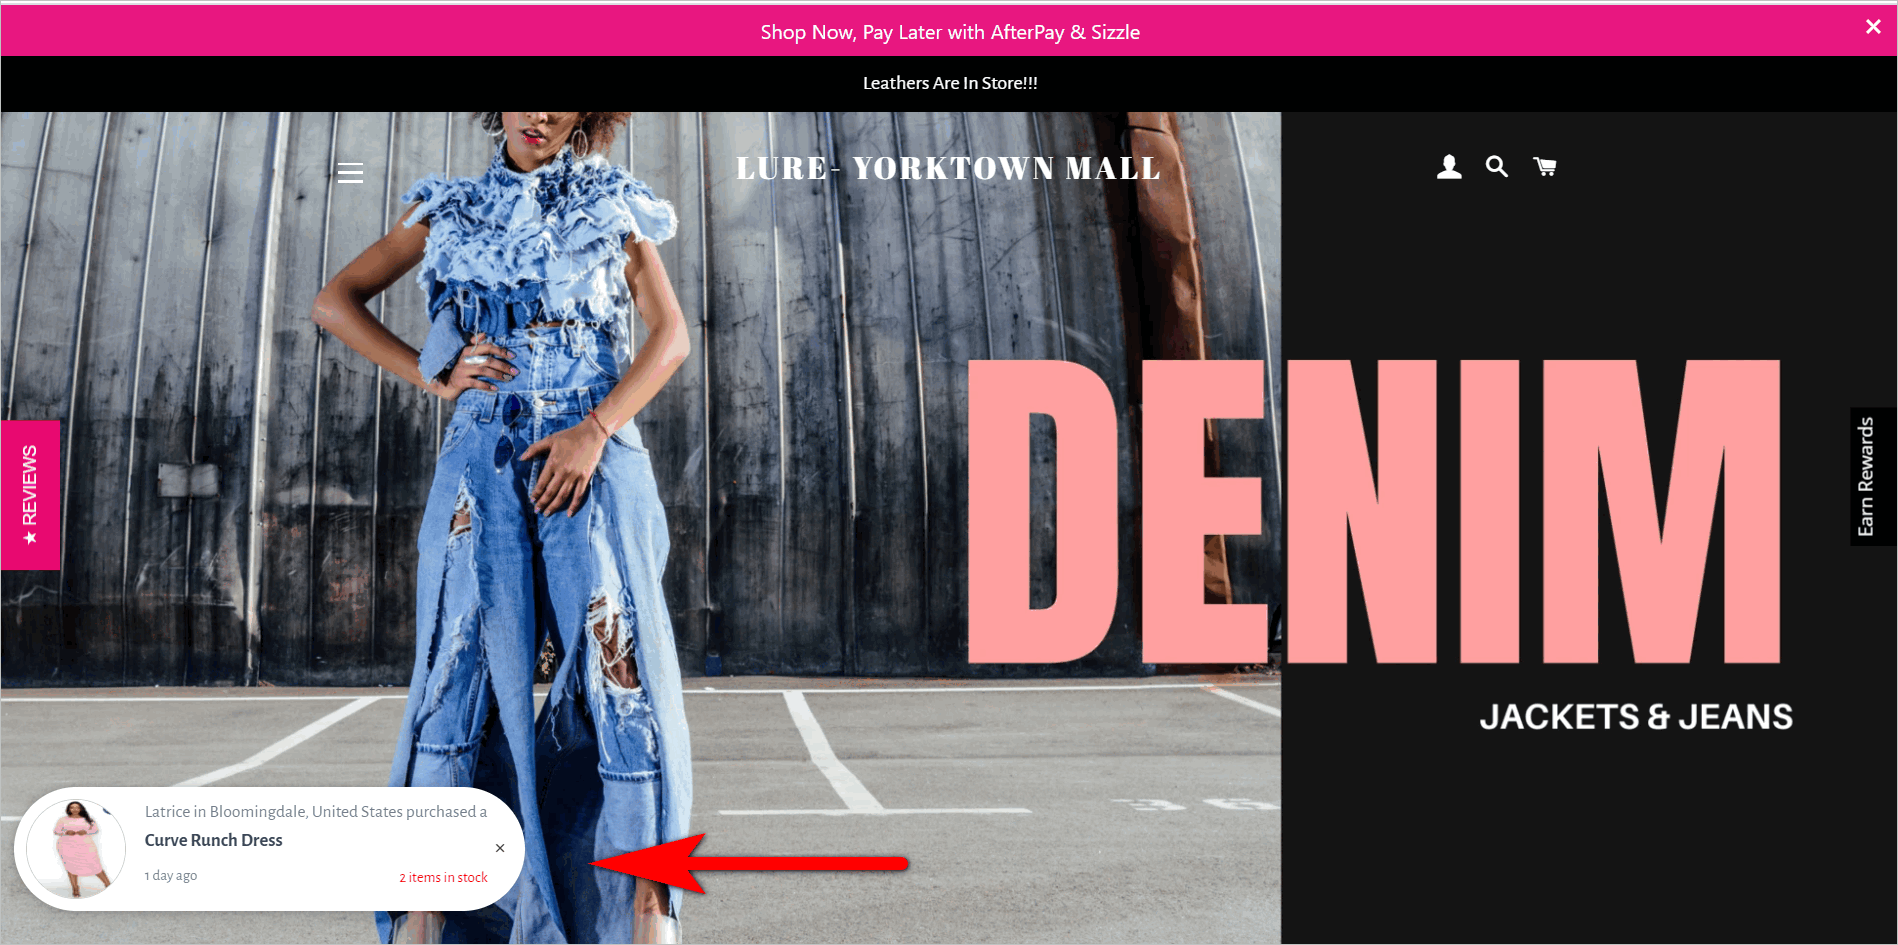 scarcity marketing - social proof example - ishoplure.com's homepage shows a recent sales popup on the lower left side of the page. the popup includes the first name and the location of the customer, the item they bought, and the number of items in stock for that product